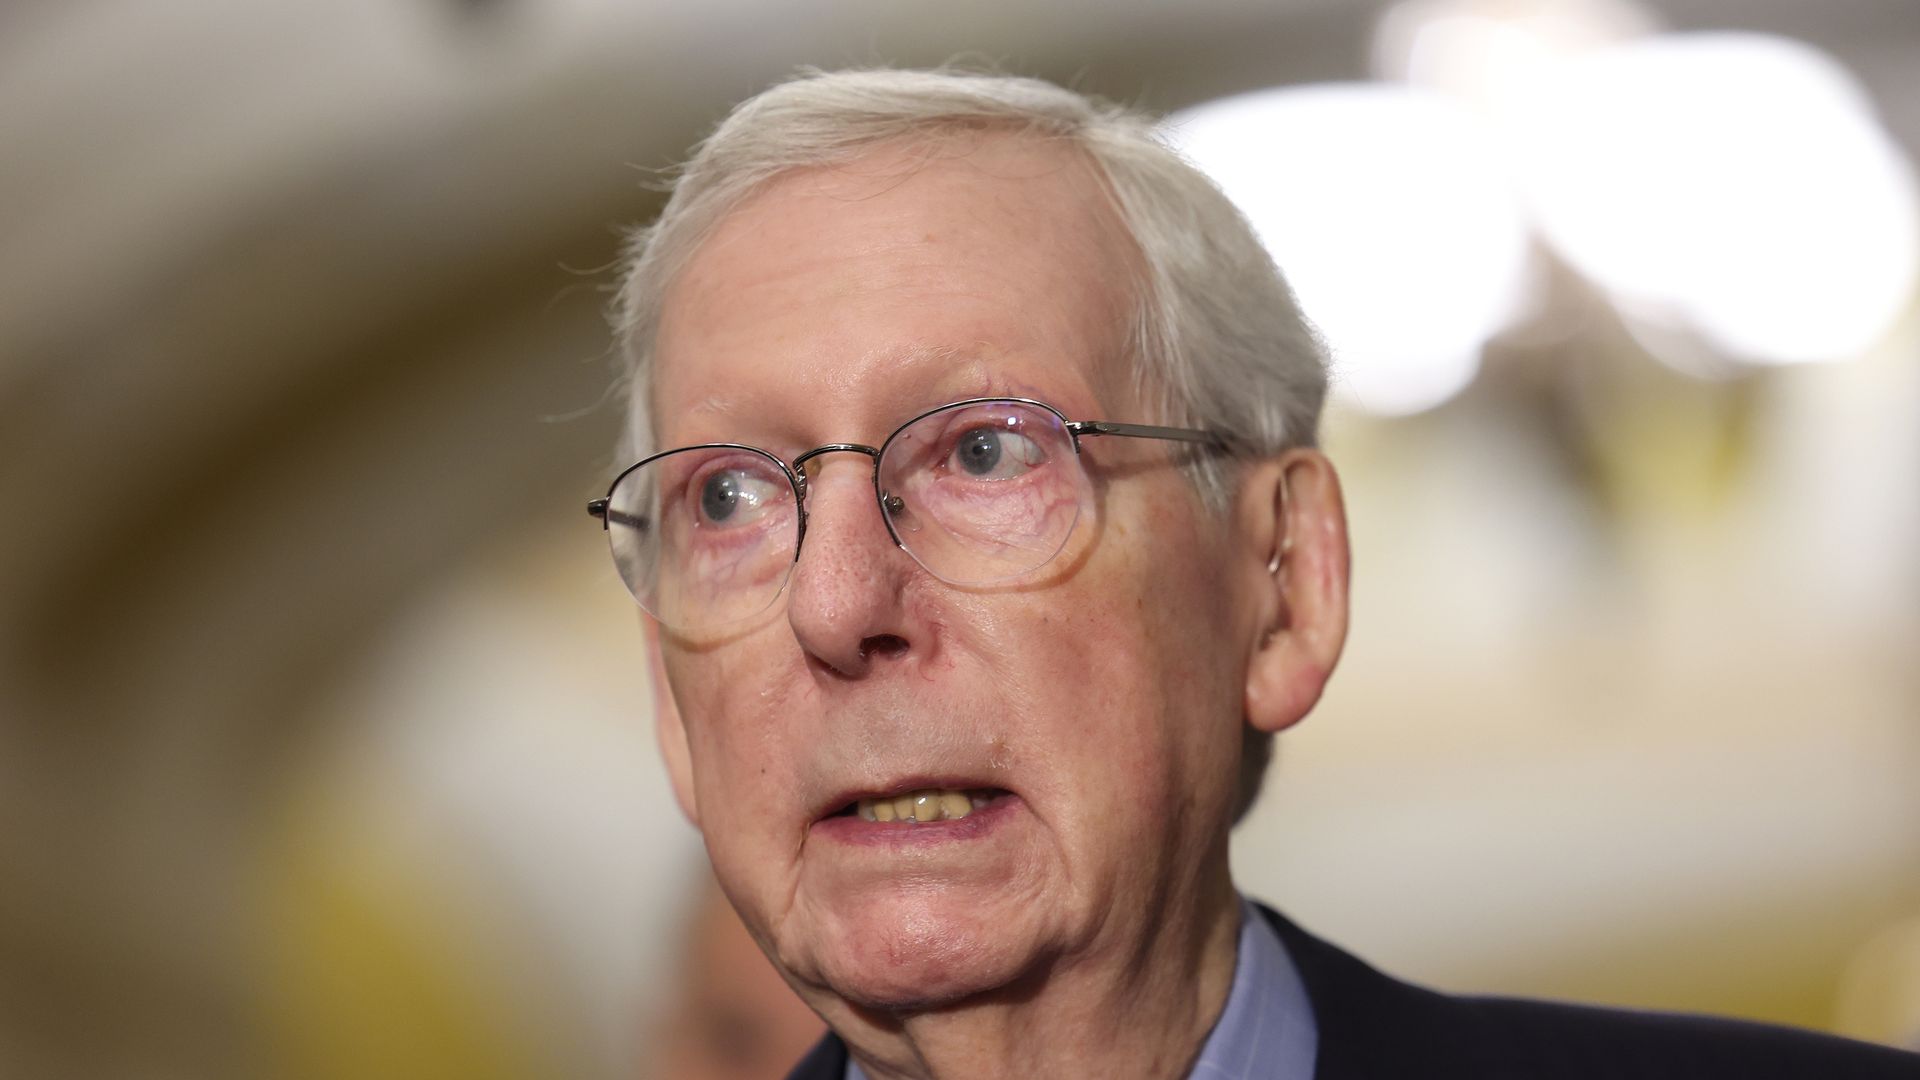 Most Americans think McConnell's health, age “severely” limit job